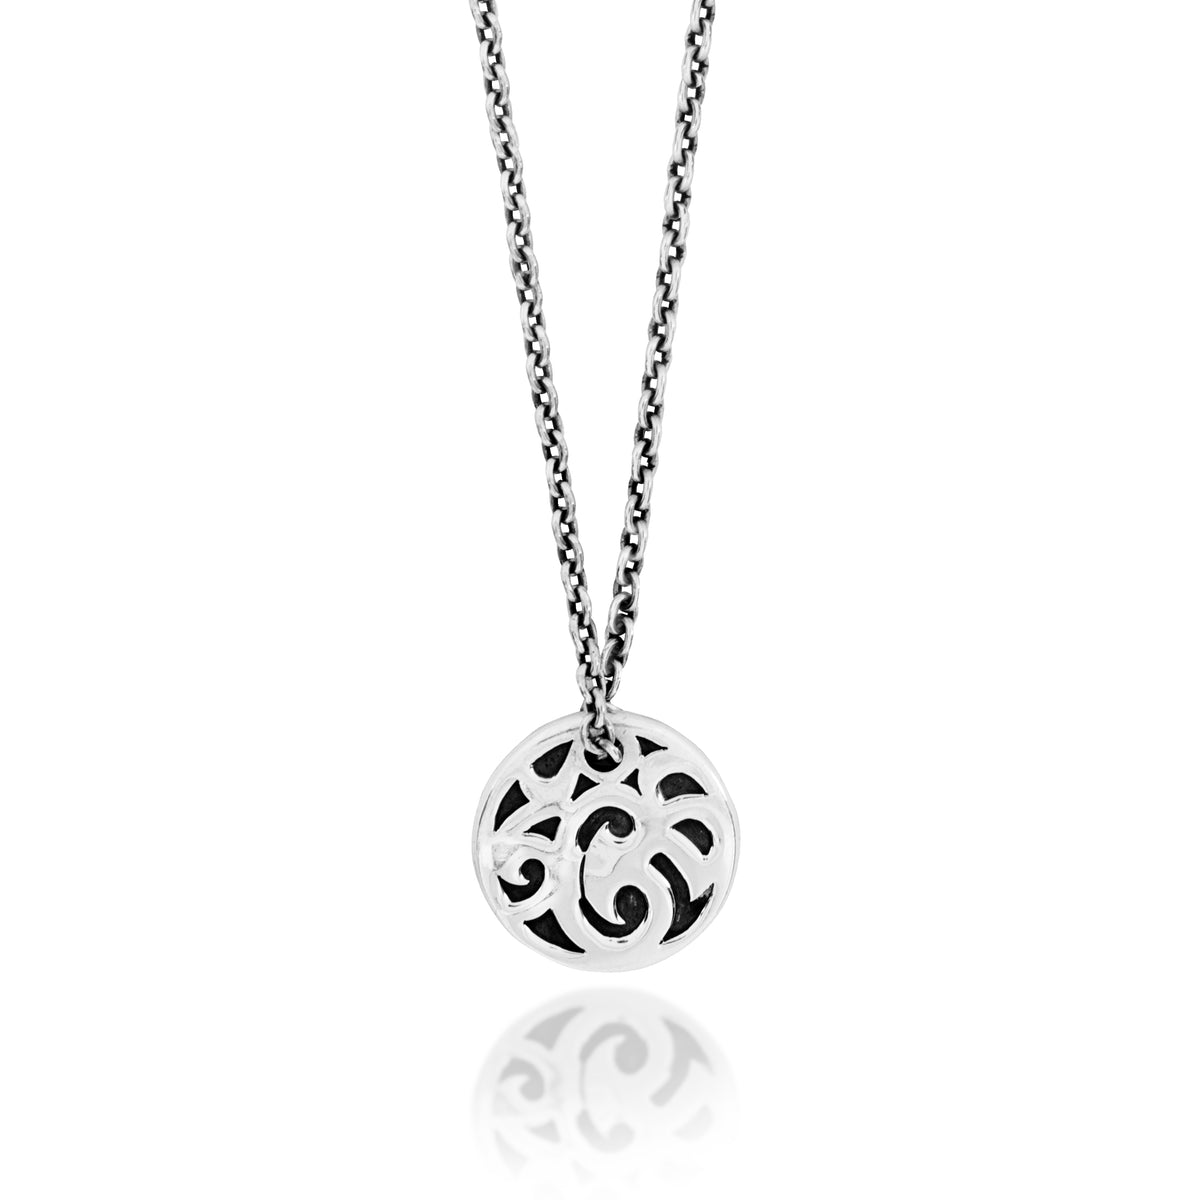 Classic Round LH Tribal Scroll Pendant Necklace. 18mm Pendant